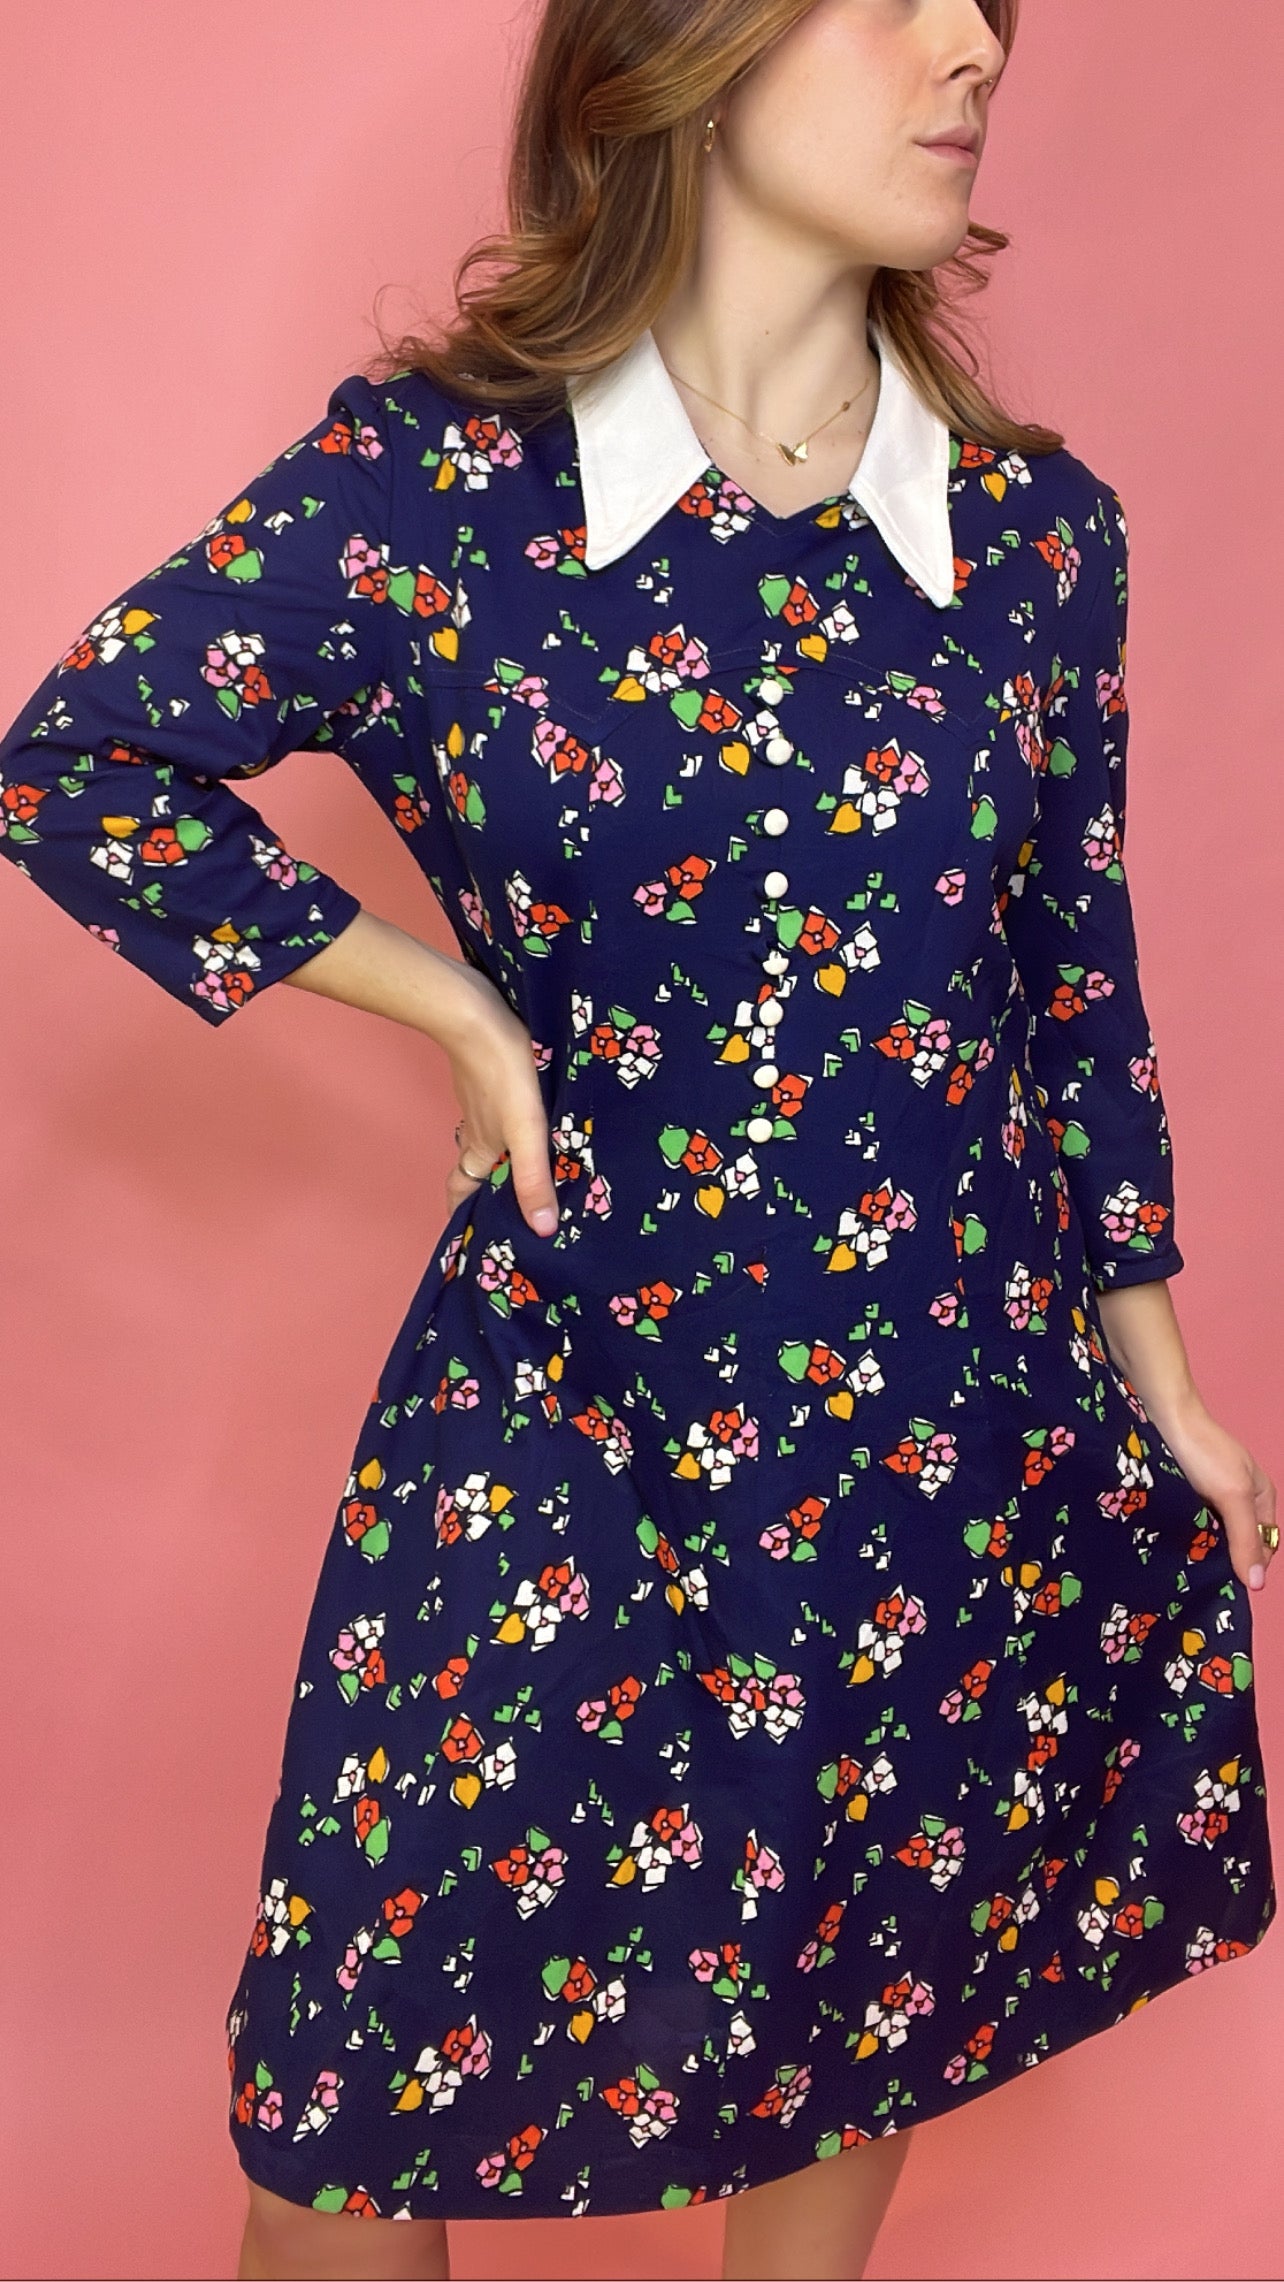 The Missy Dress, 1960’s, 40” Bust